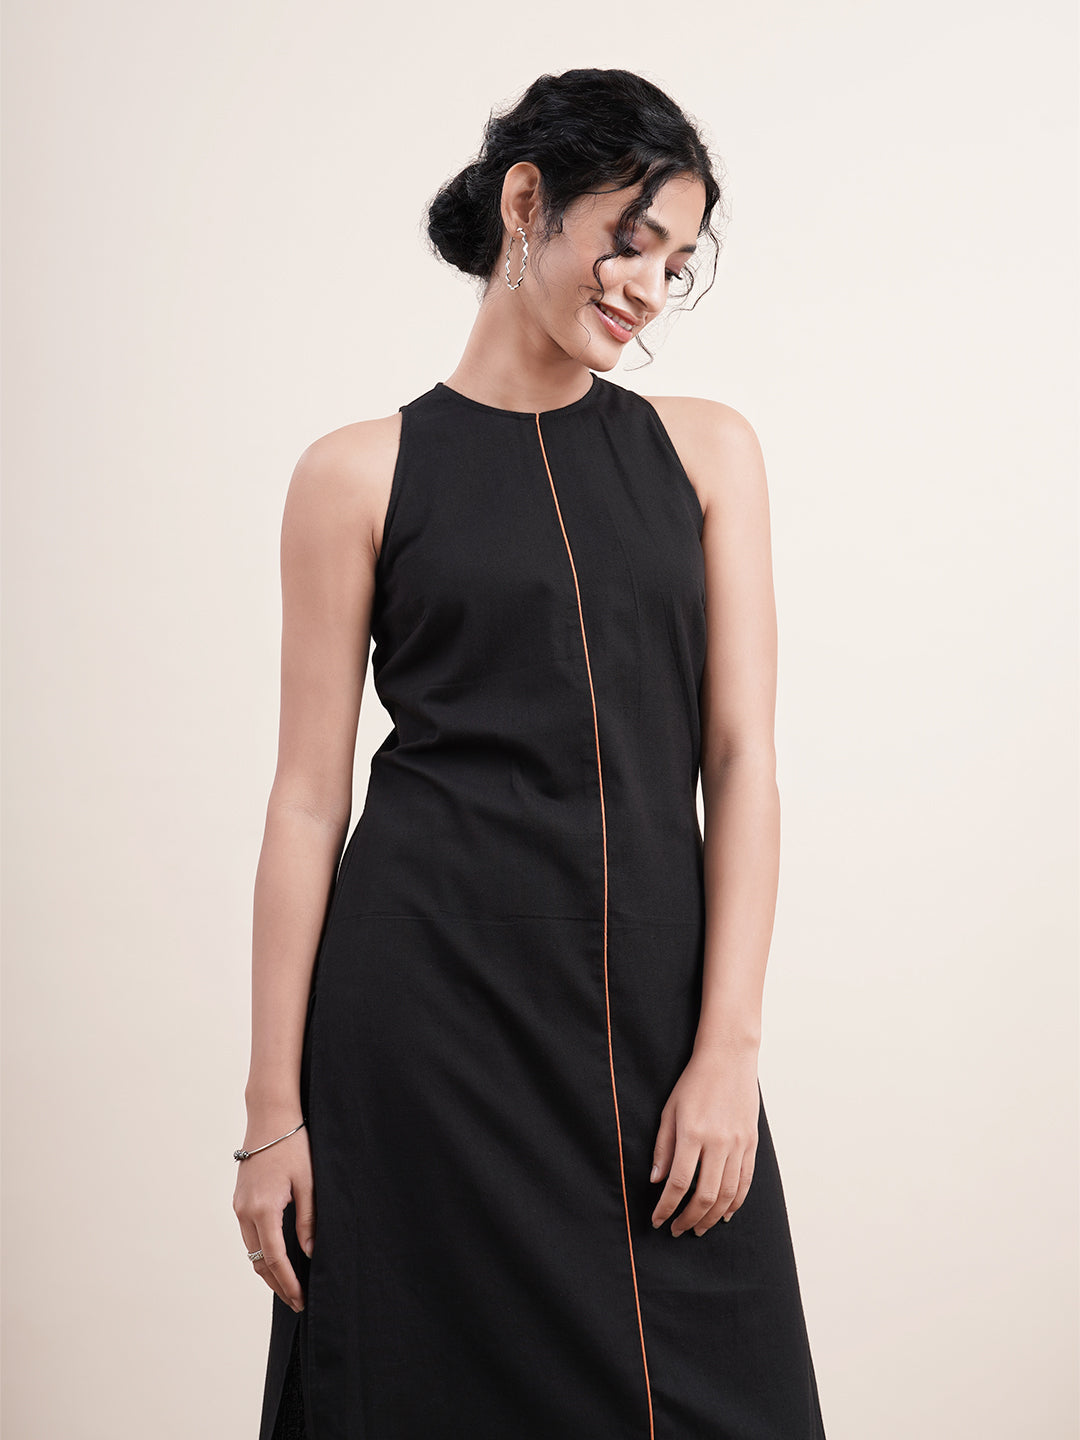 Black High-low halter neck Kurta with contrast piping